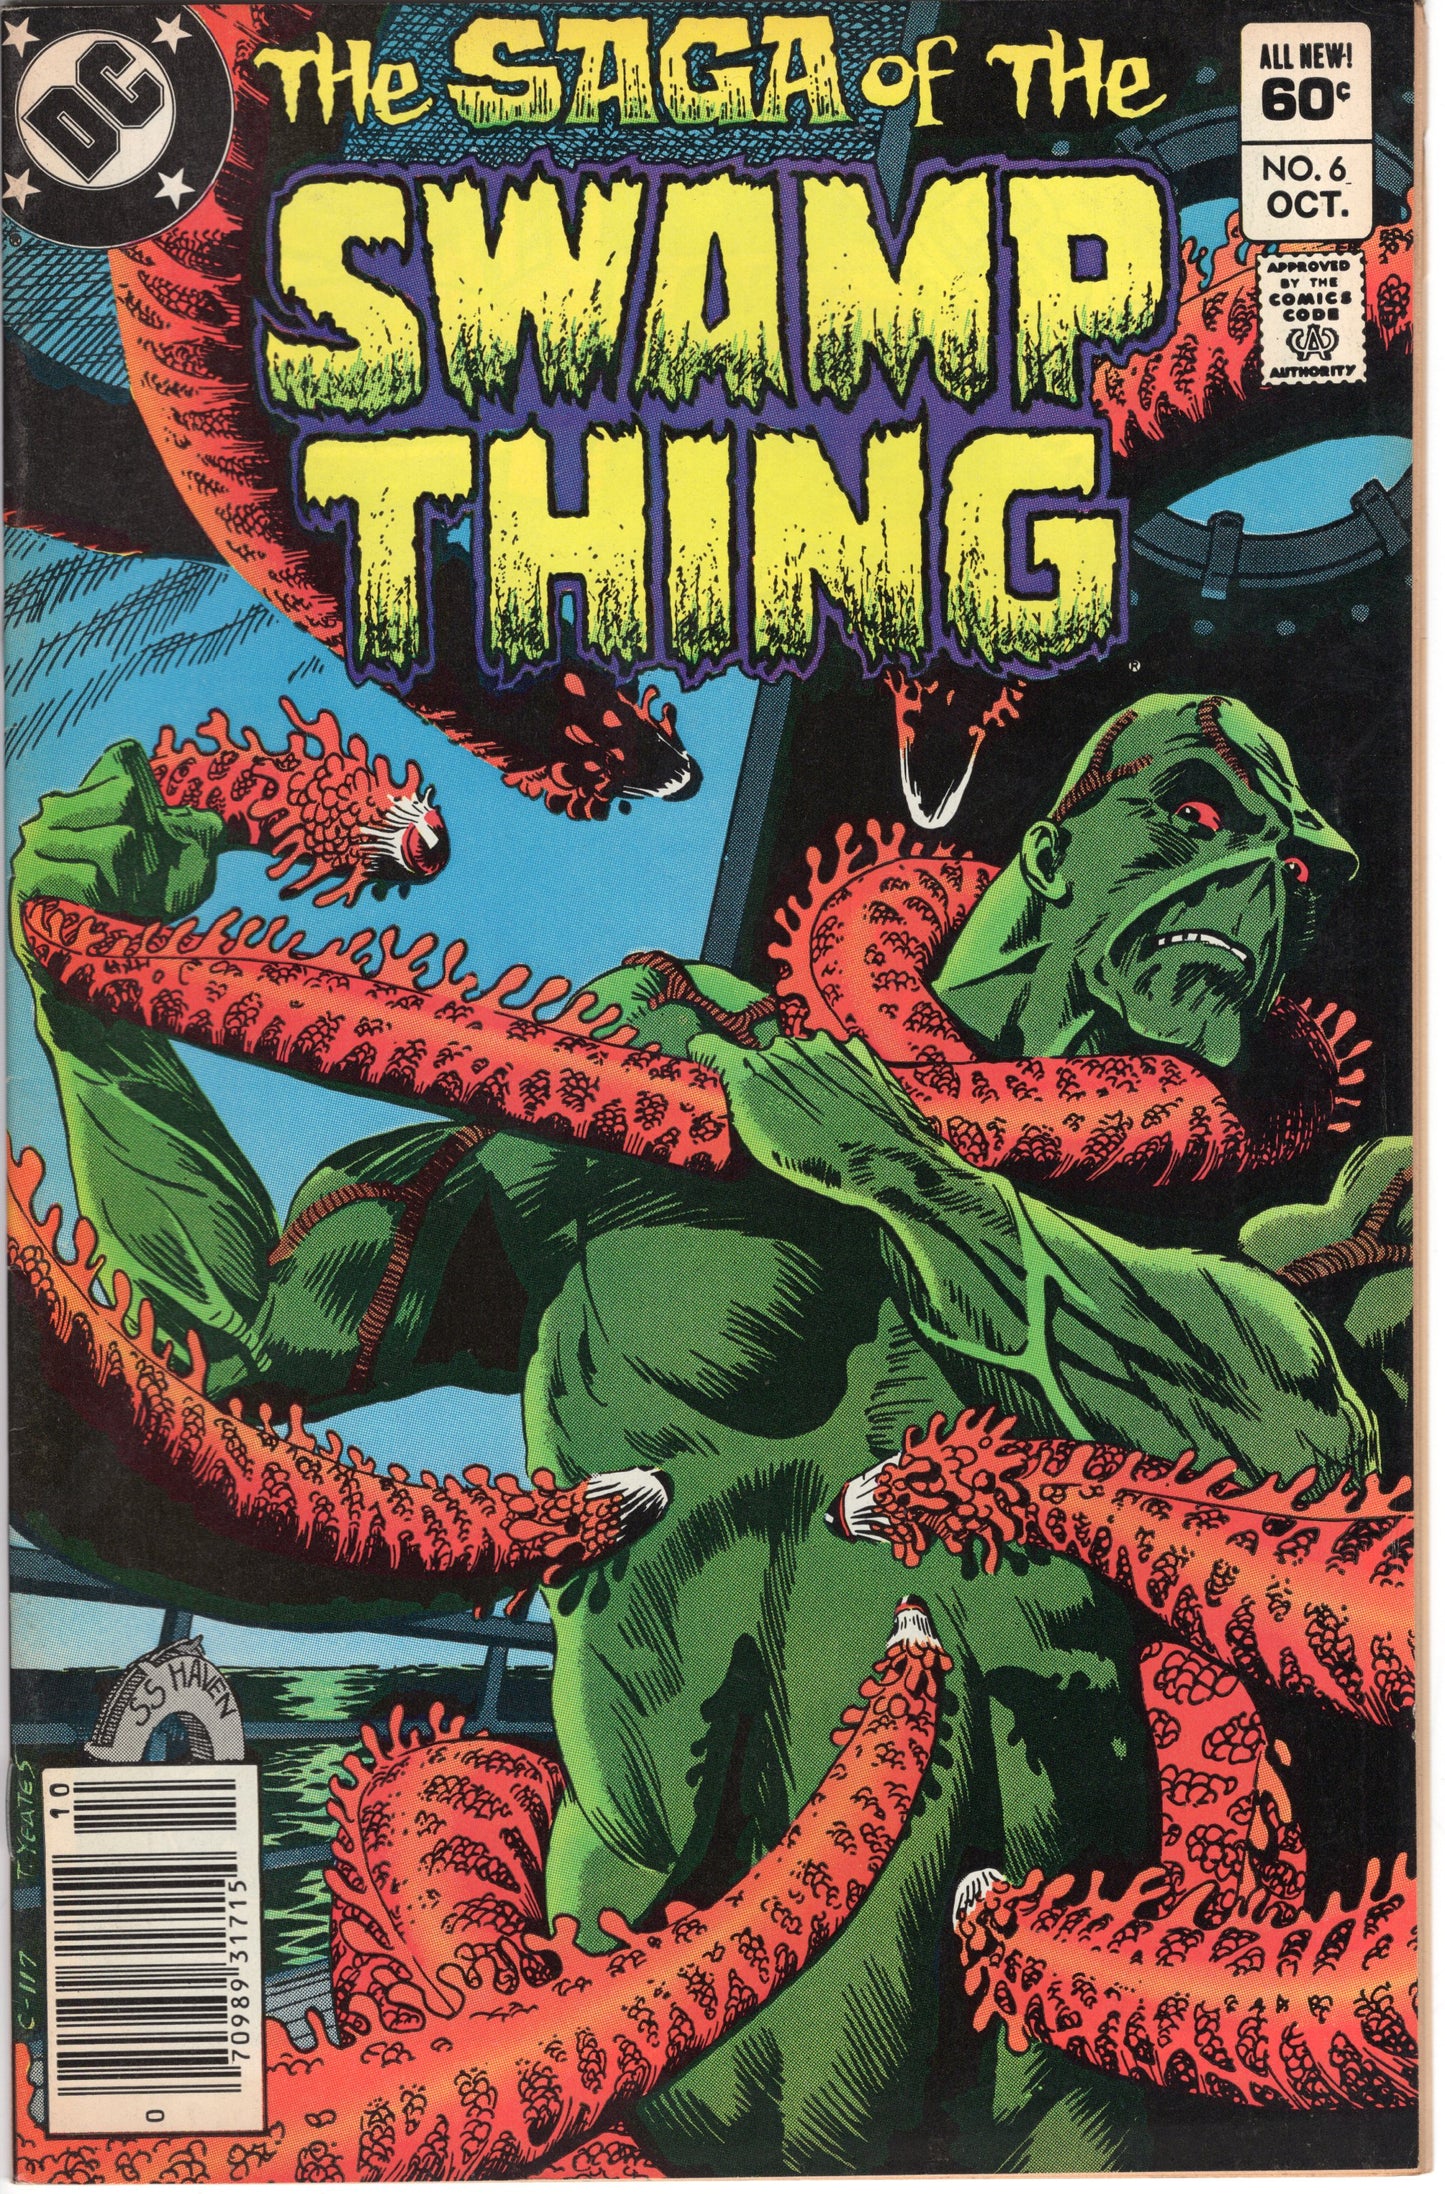 The Saga of the Swamp Thing - Issue #6 (Oct. 1982 - DC Comics) VG+